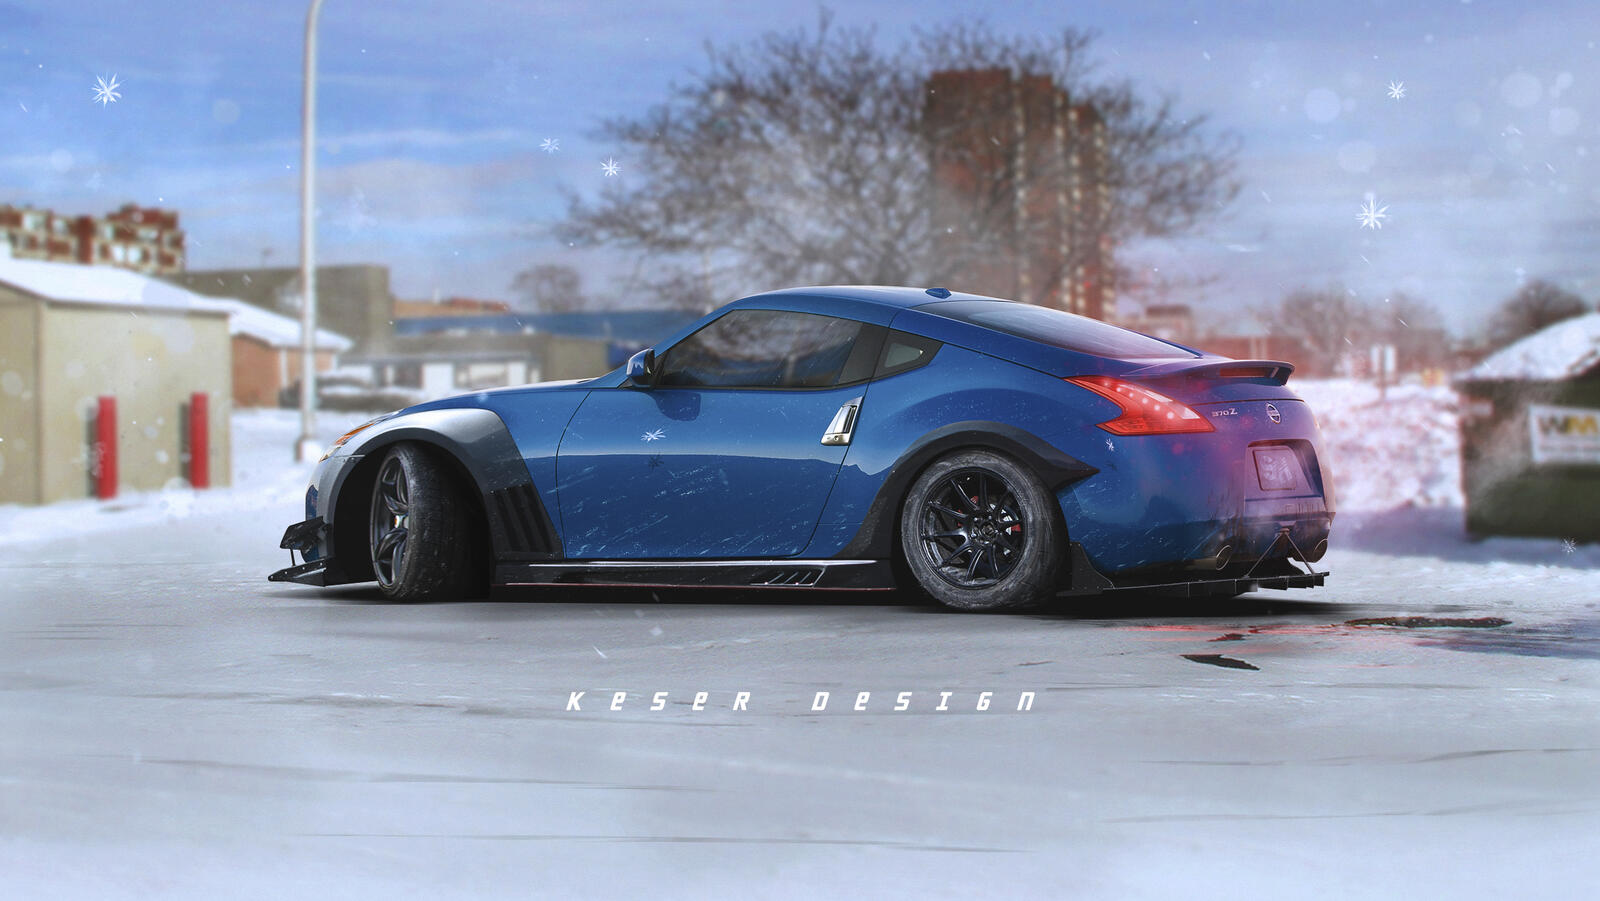 Free photo Rendered picture of a Nissan 370Z in blue